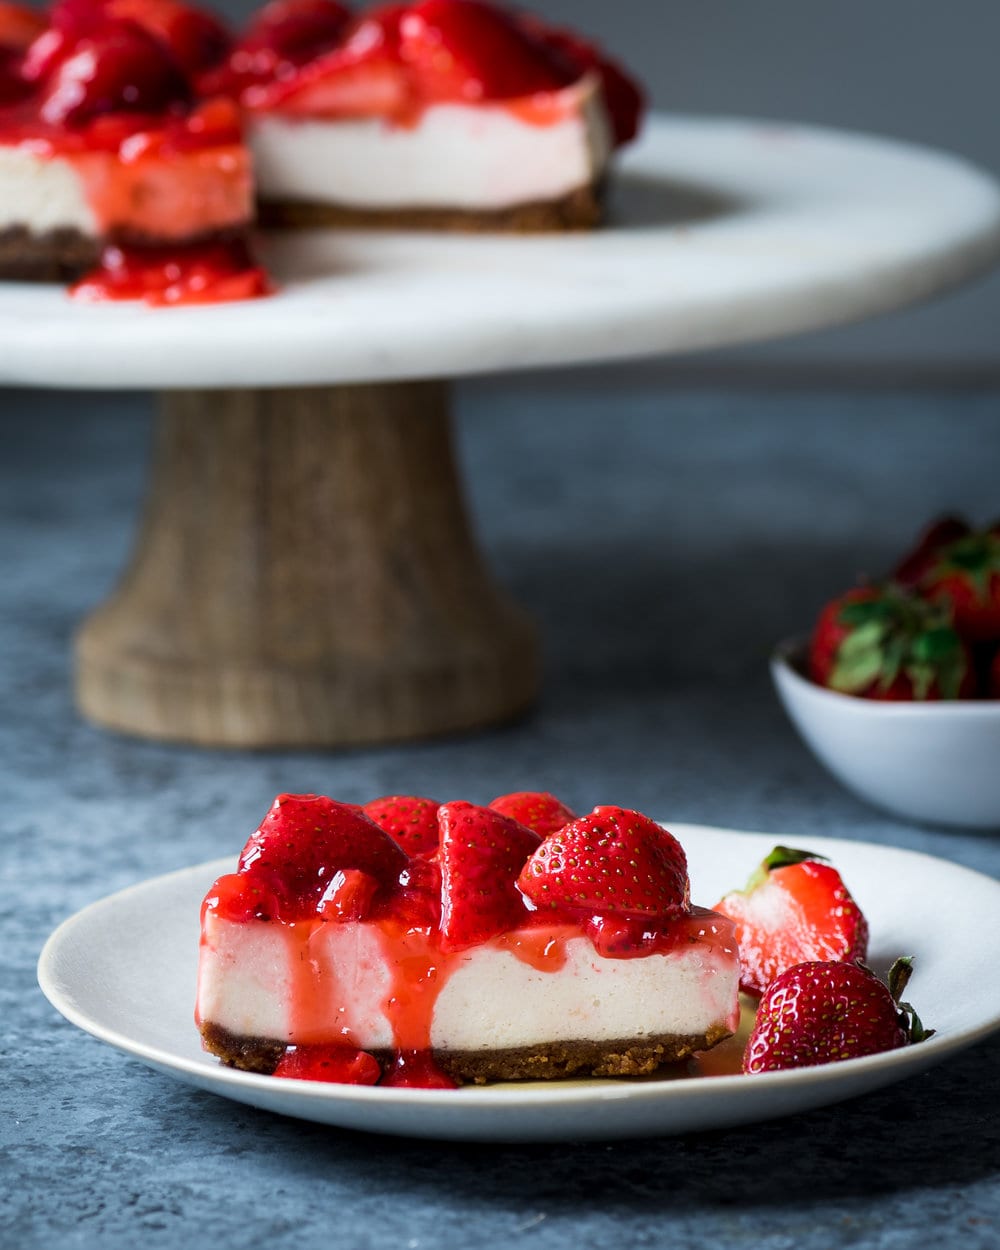 Slice of cheesecake with strawberries on a plate in front of rest of cheesecake on a stand.